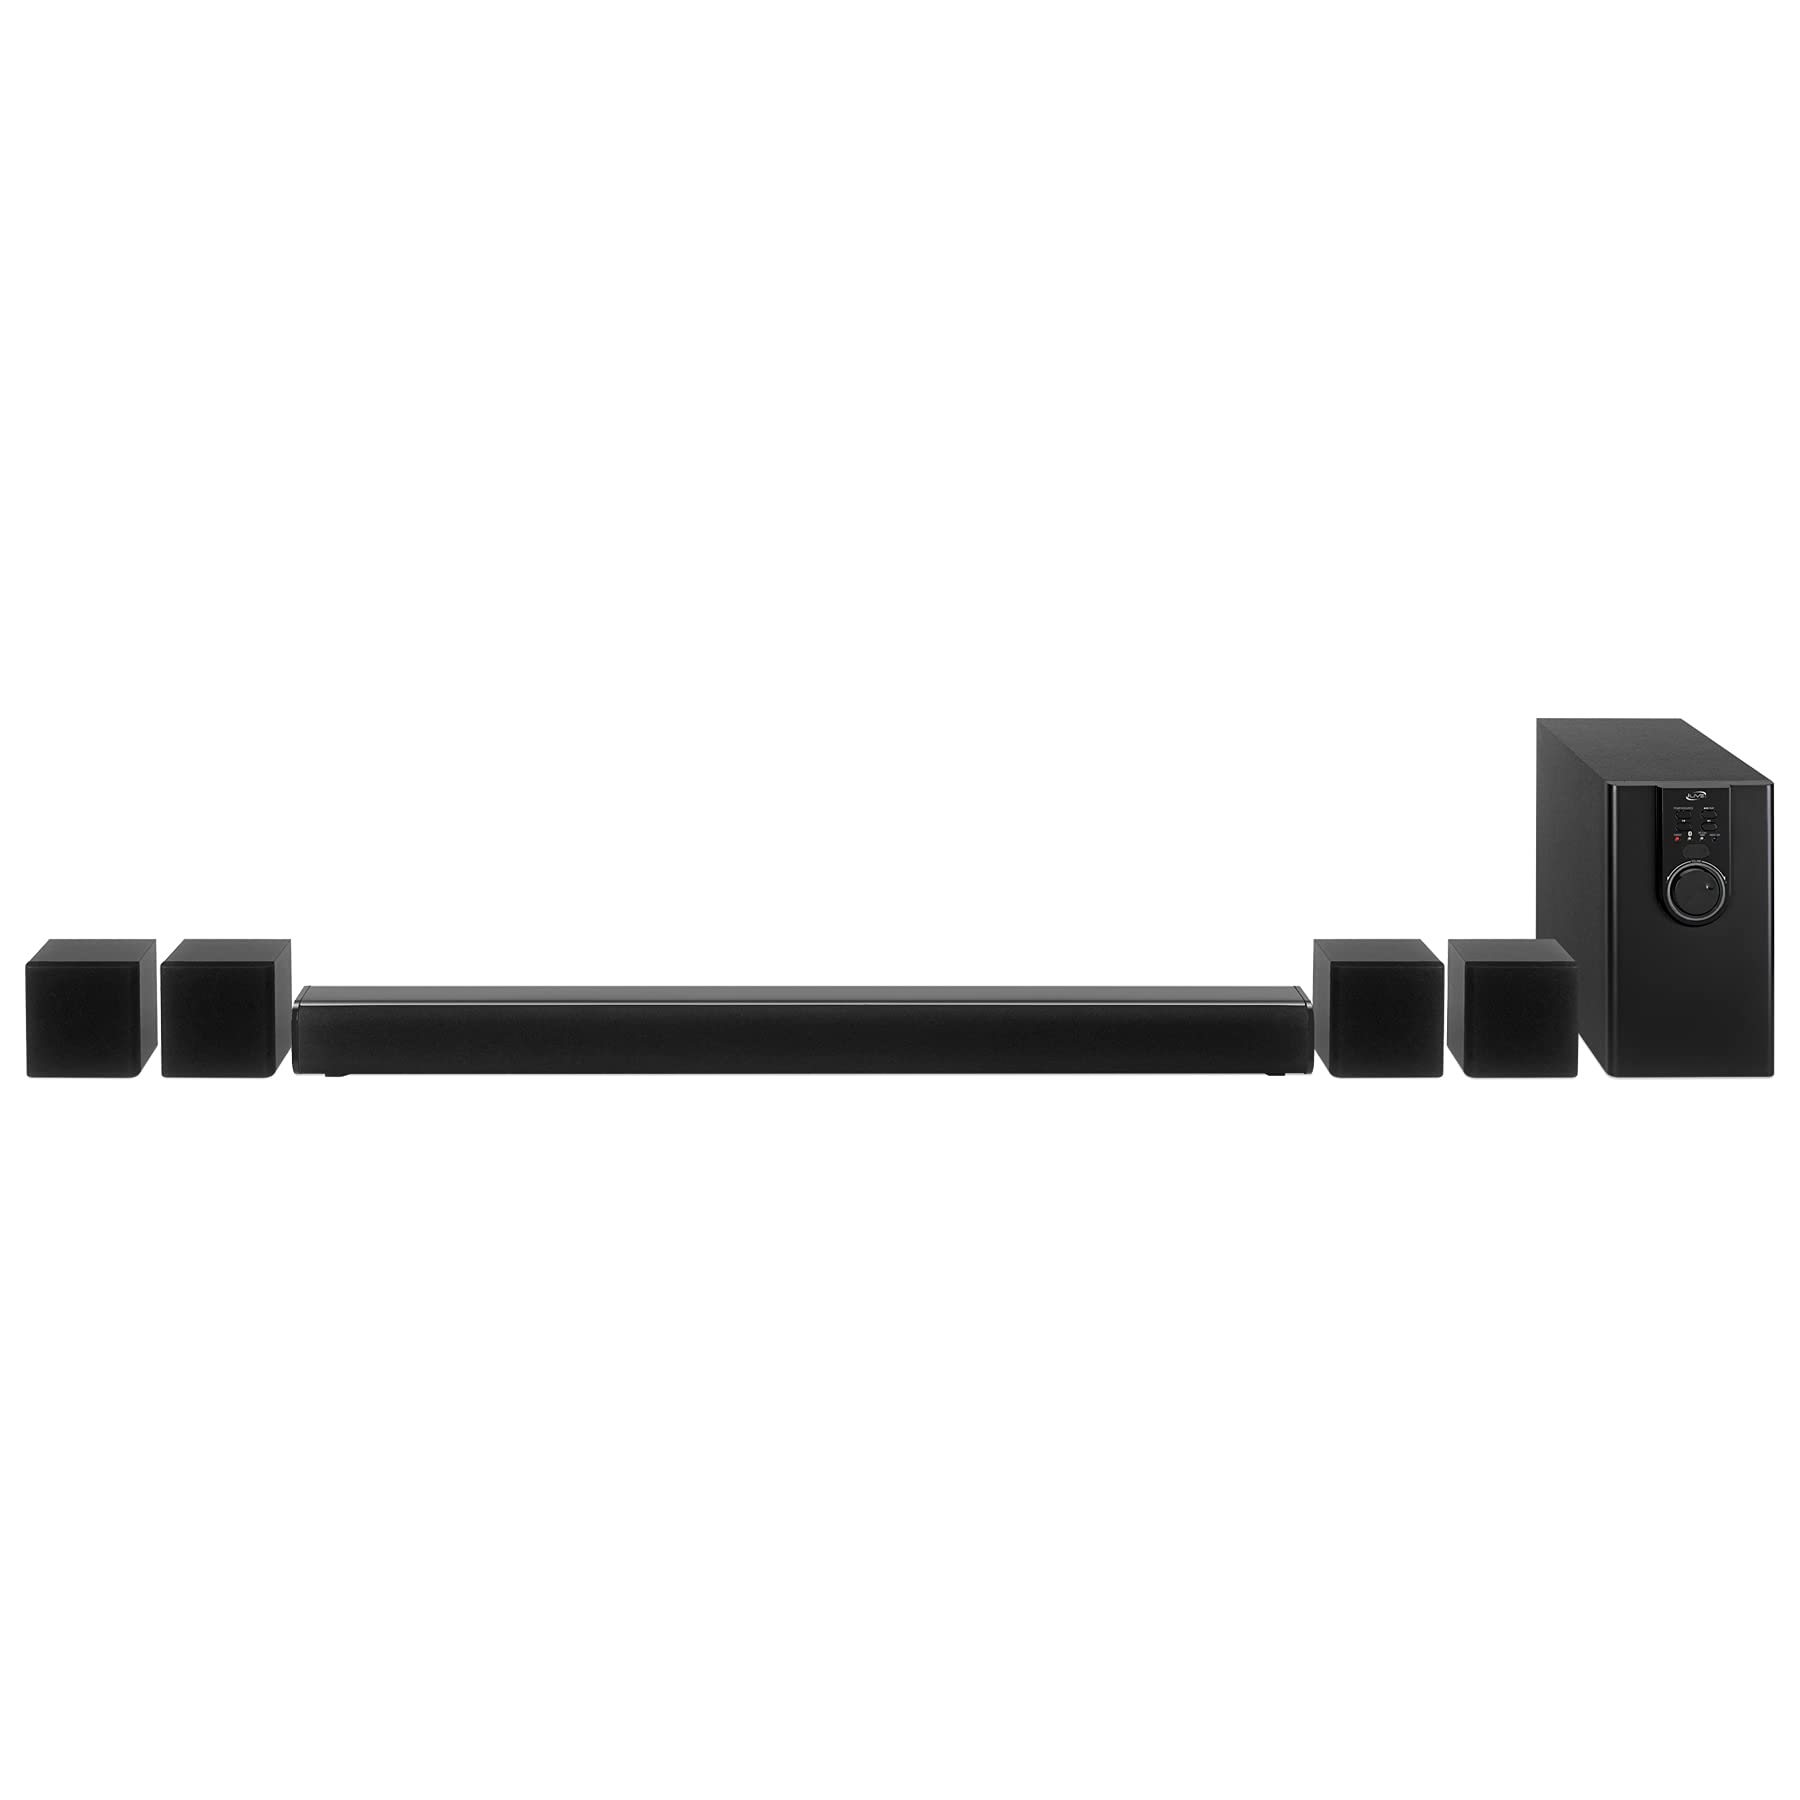 iLive 5.1 Home Theater System with Bluetooth, 6 Surround Speakers, Wall Mountable, Includes Remote, Black (IHTB159B)